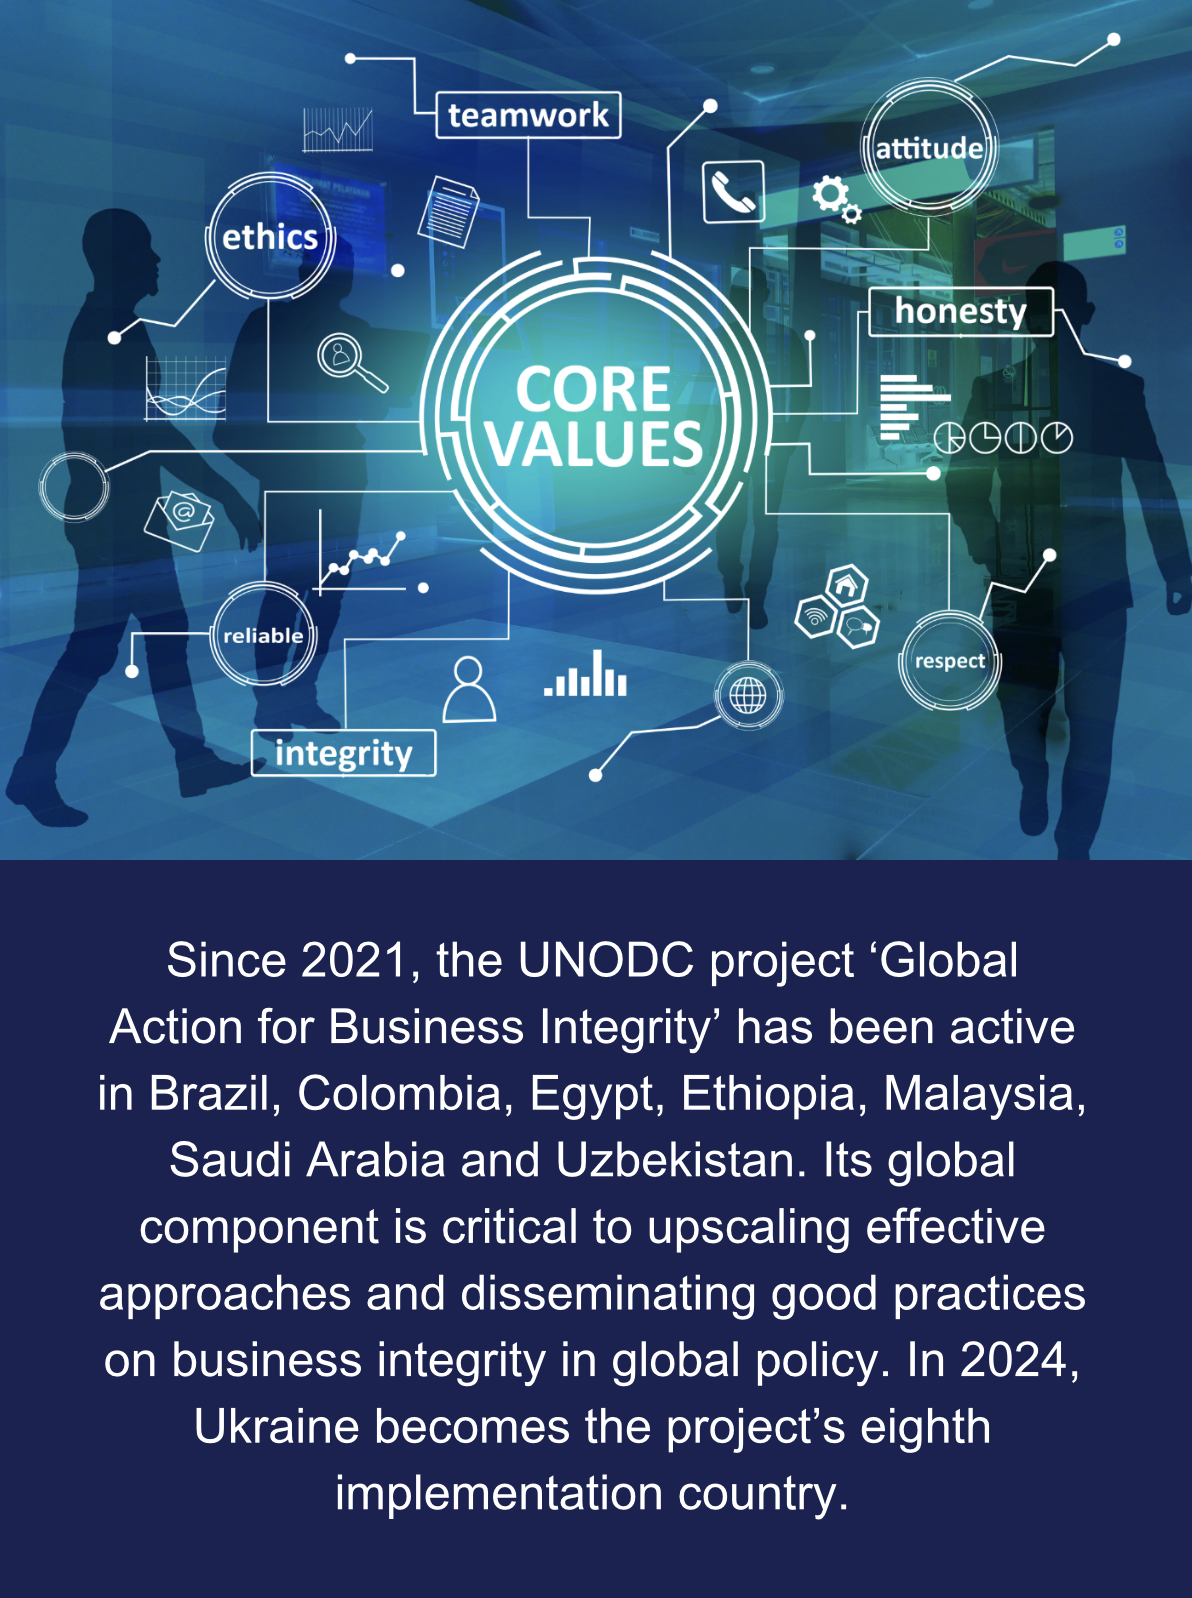 Since 2021, the UNODC project ‘Global Action for Business Integrity’ has been active in Brazil, Colombia, Egypt, Ethiopia, Malaysia, Saudi Arabia and Uzbekistan and has a global component, critical to upscaling effective approaches and disseminating good practices on business integrity in global policy. Ukraine becomes the project’s eighth implementation country.